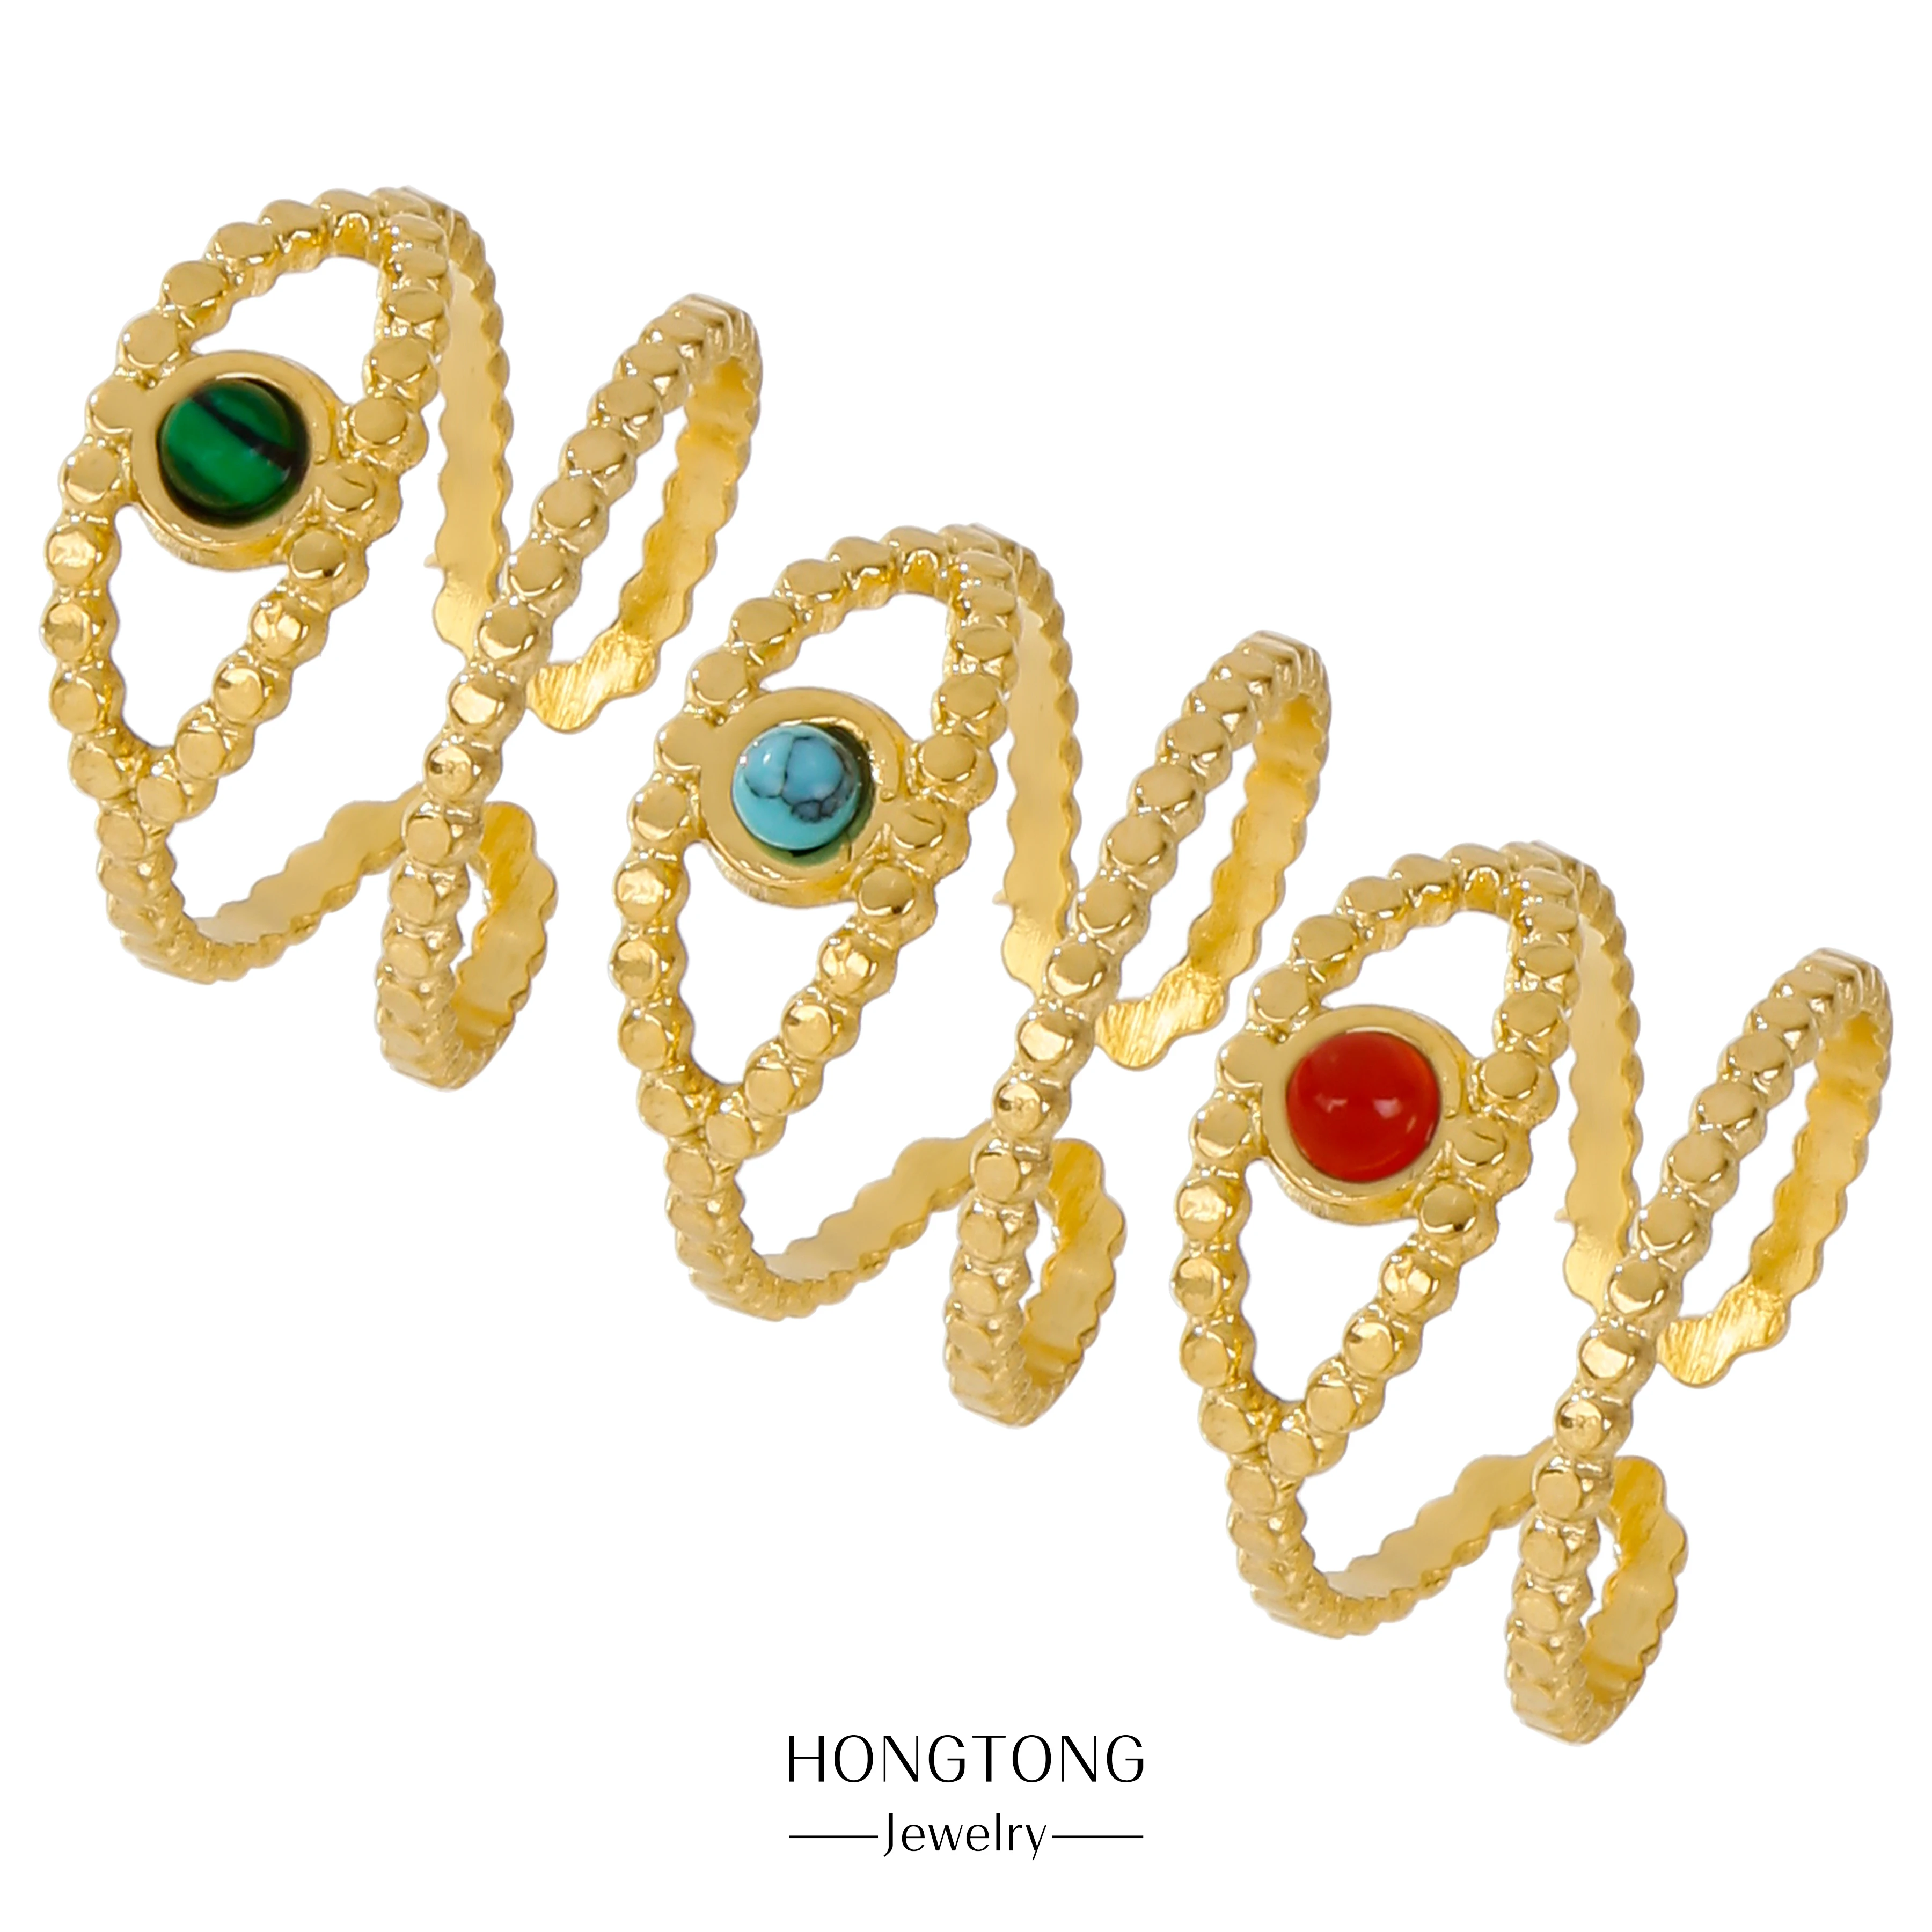 

HONGTONG 18K Gold-Plated Three-Color Eyes Gemstone Oil Pressed Hot Model Best-Selling Fashion Stainless Steel Ring Jewelry Gift